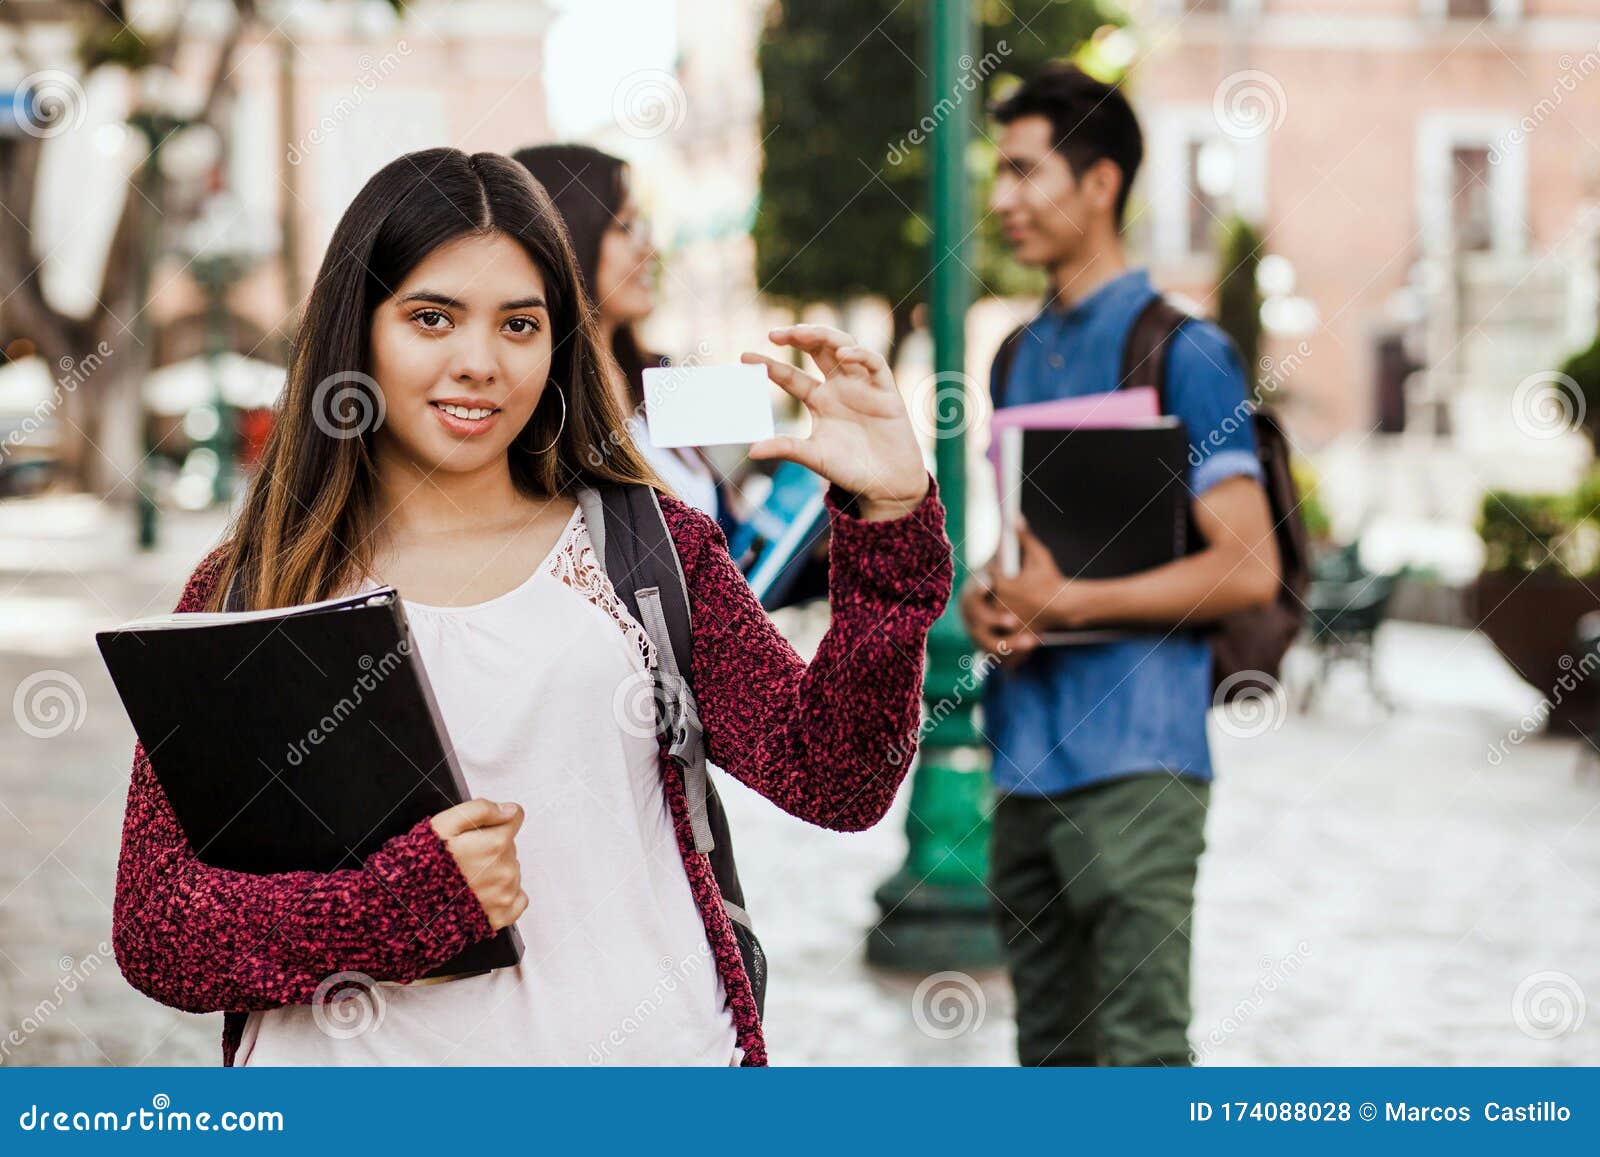 latin female student or international student in internship holding an id card in mexico city